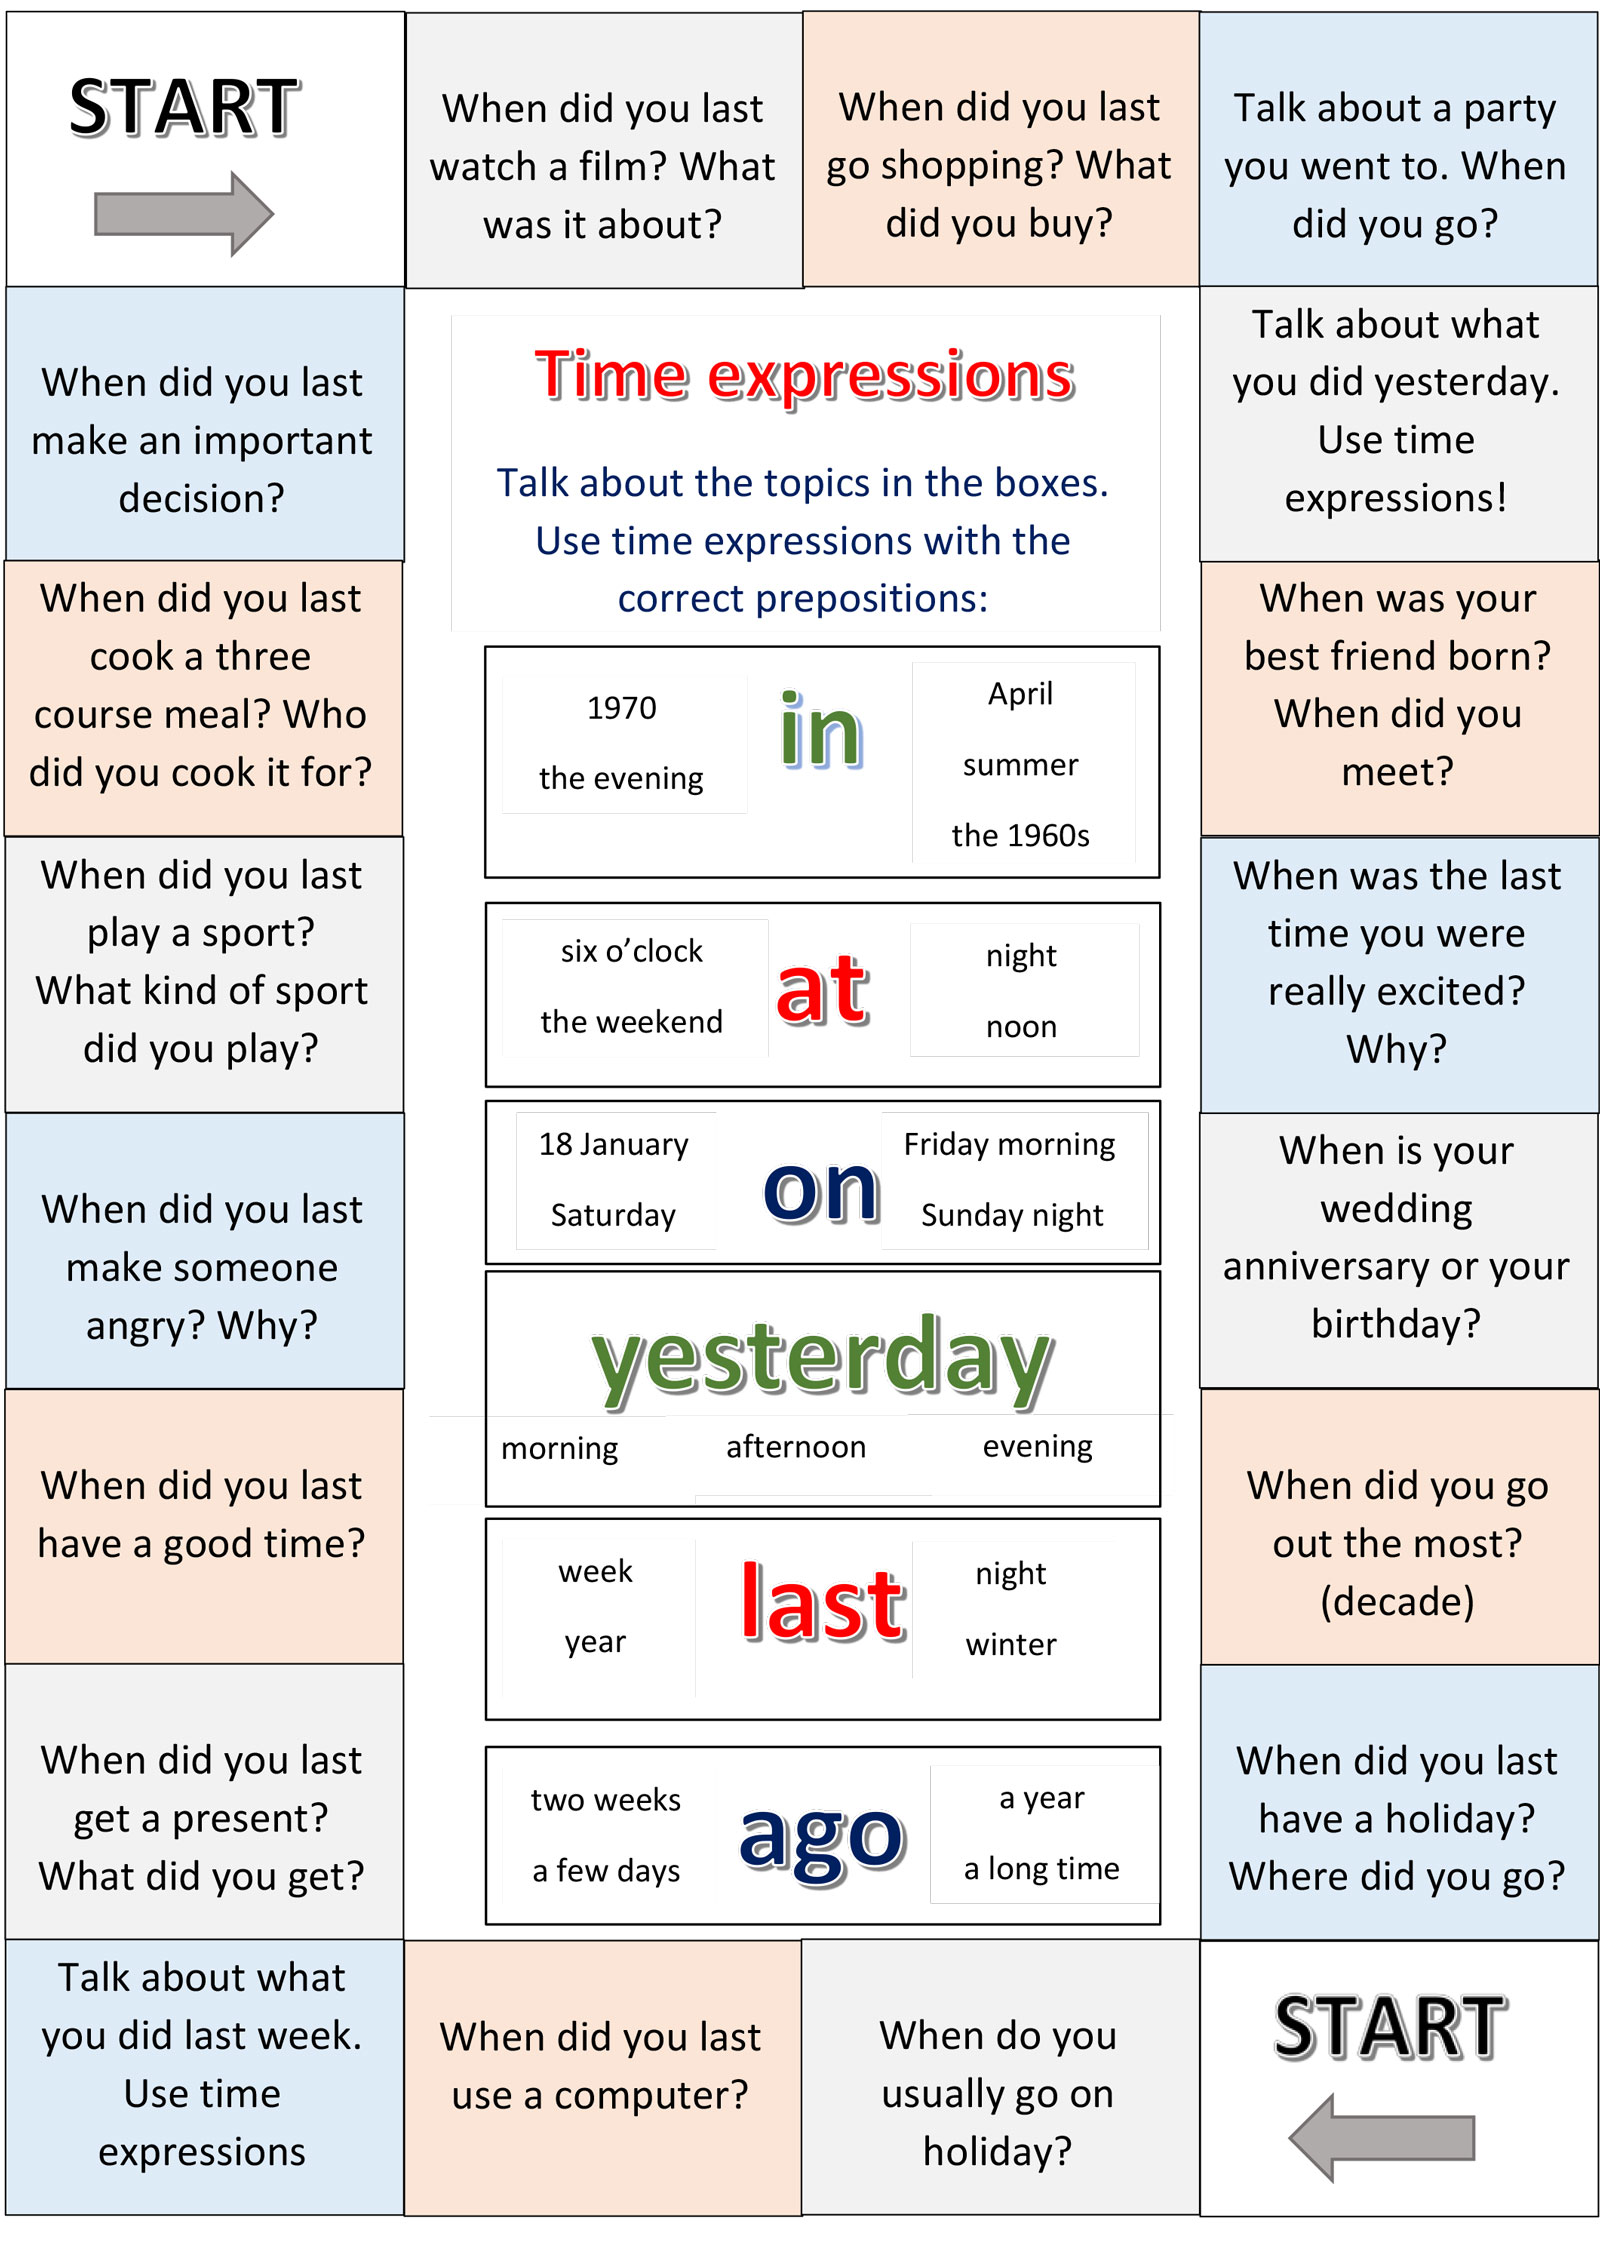 boardgame-using-time-expressions-boardgames-conversation-topics-dialogs-fun-activit_76773